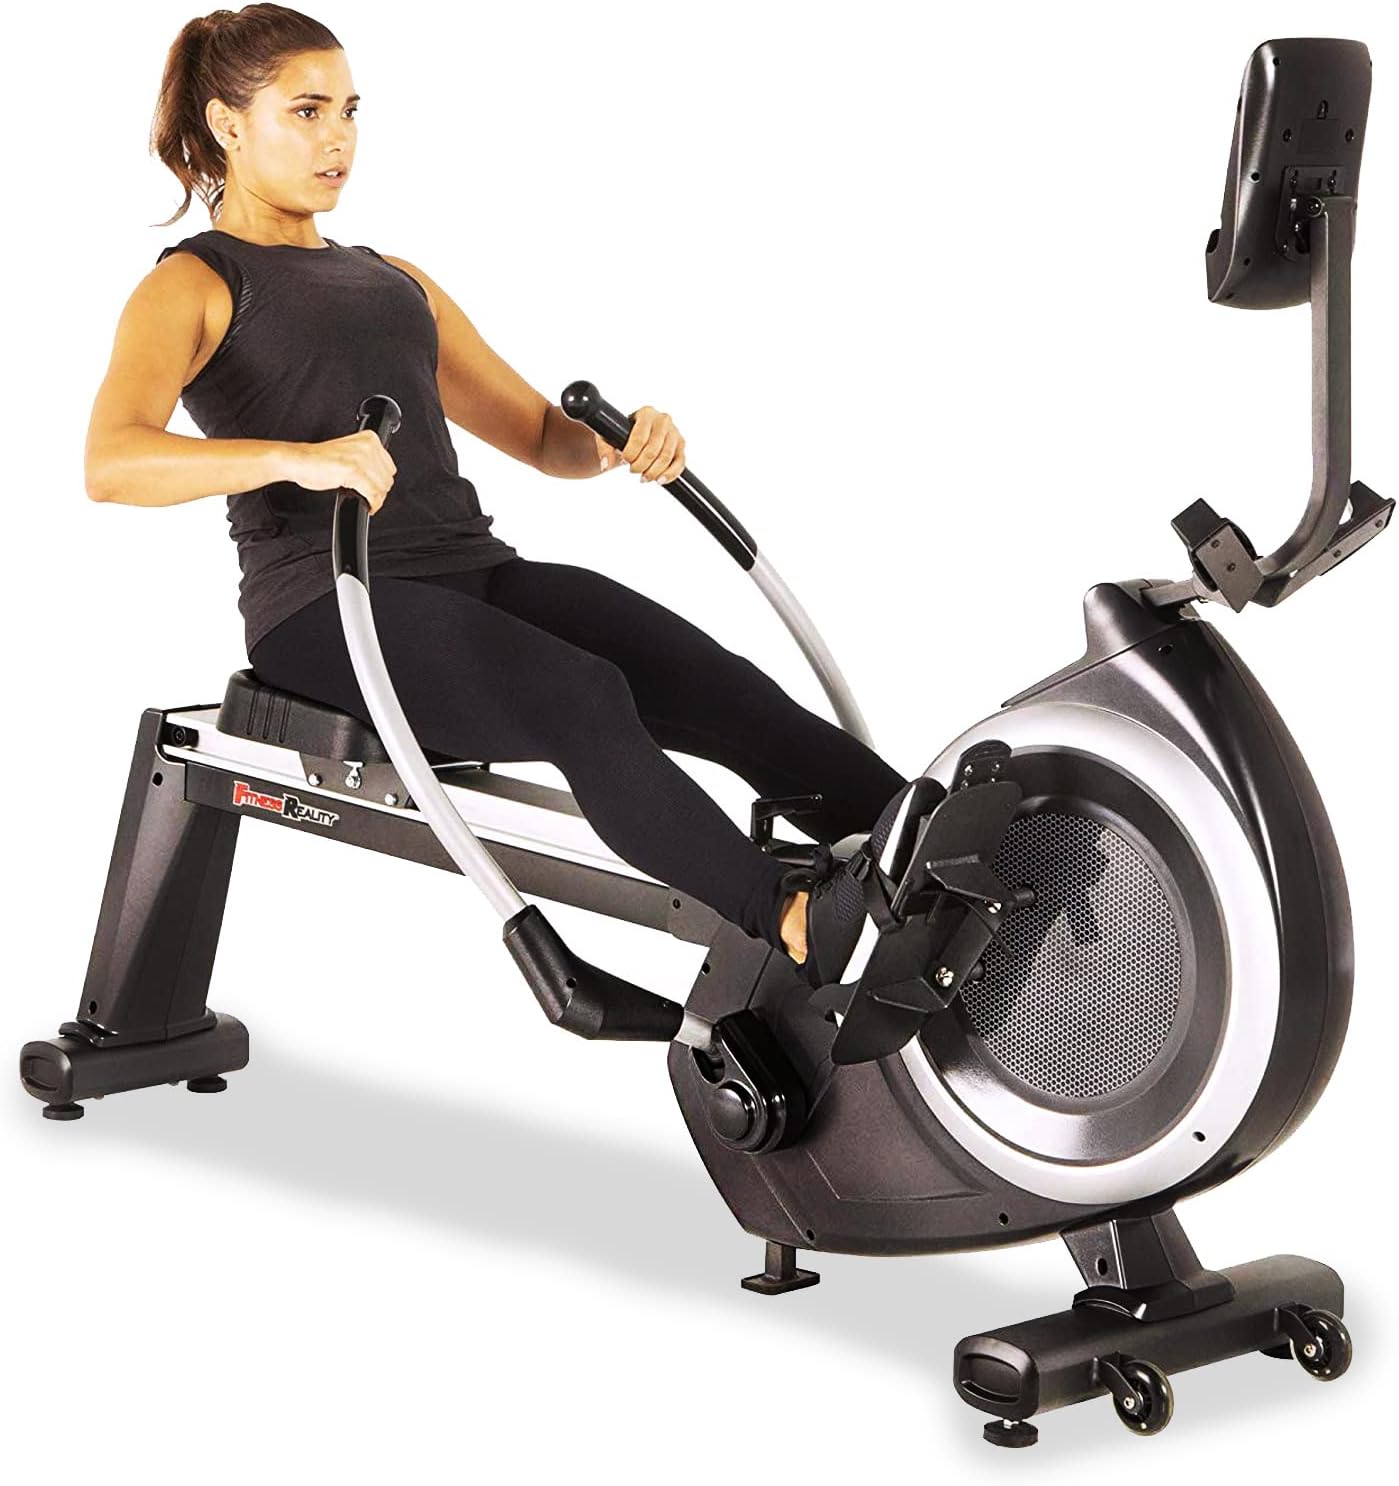 fitness reality 4000mr magnetic rowing machine review